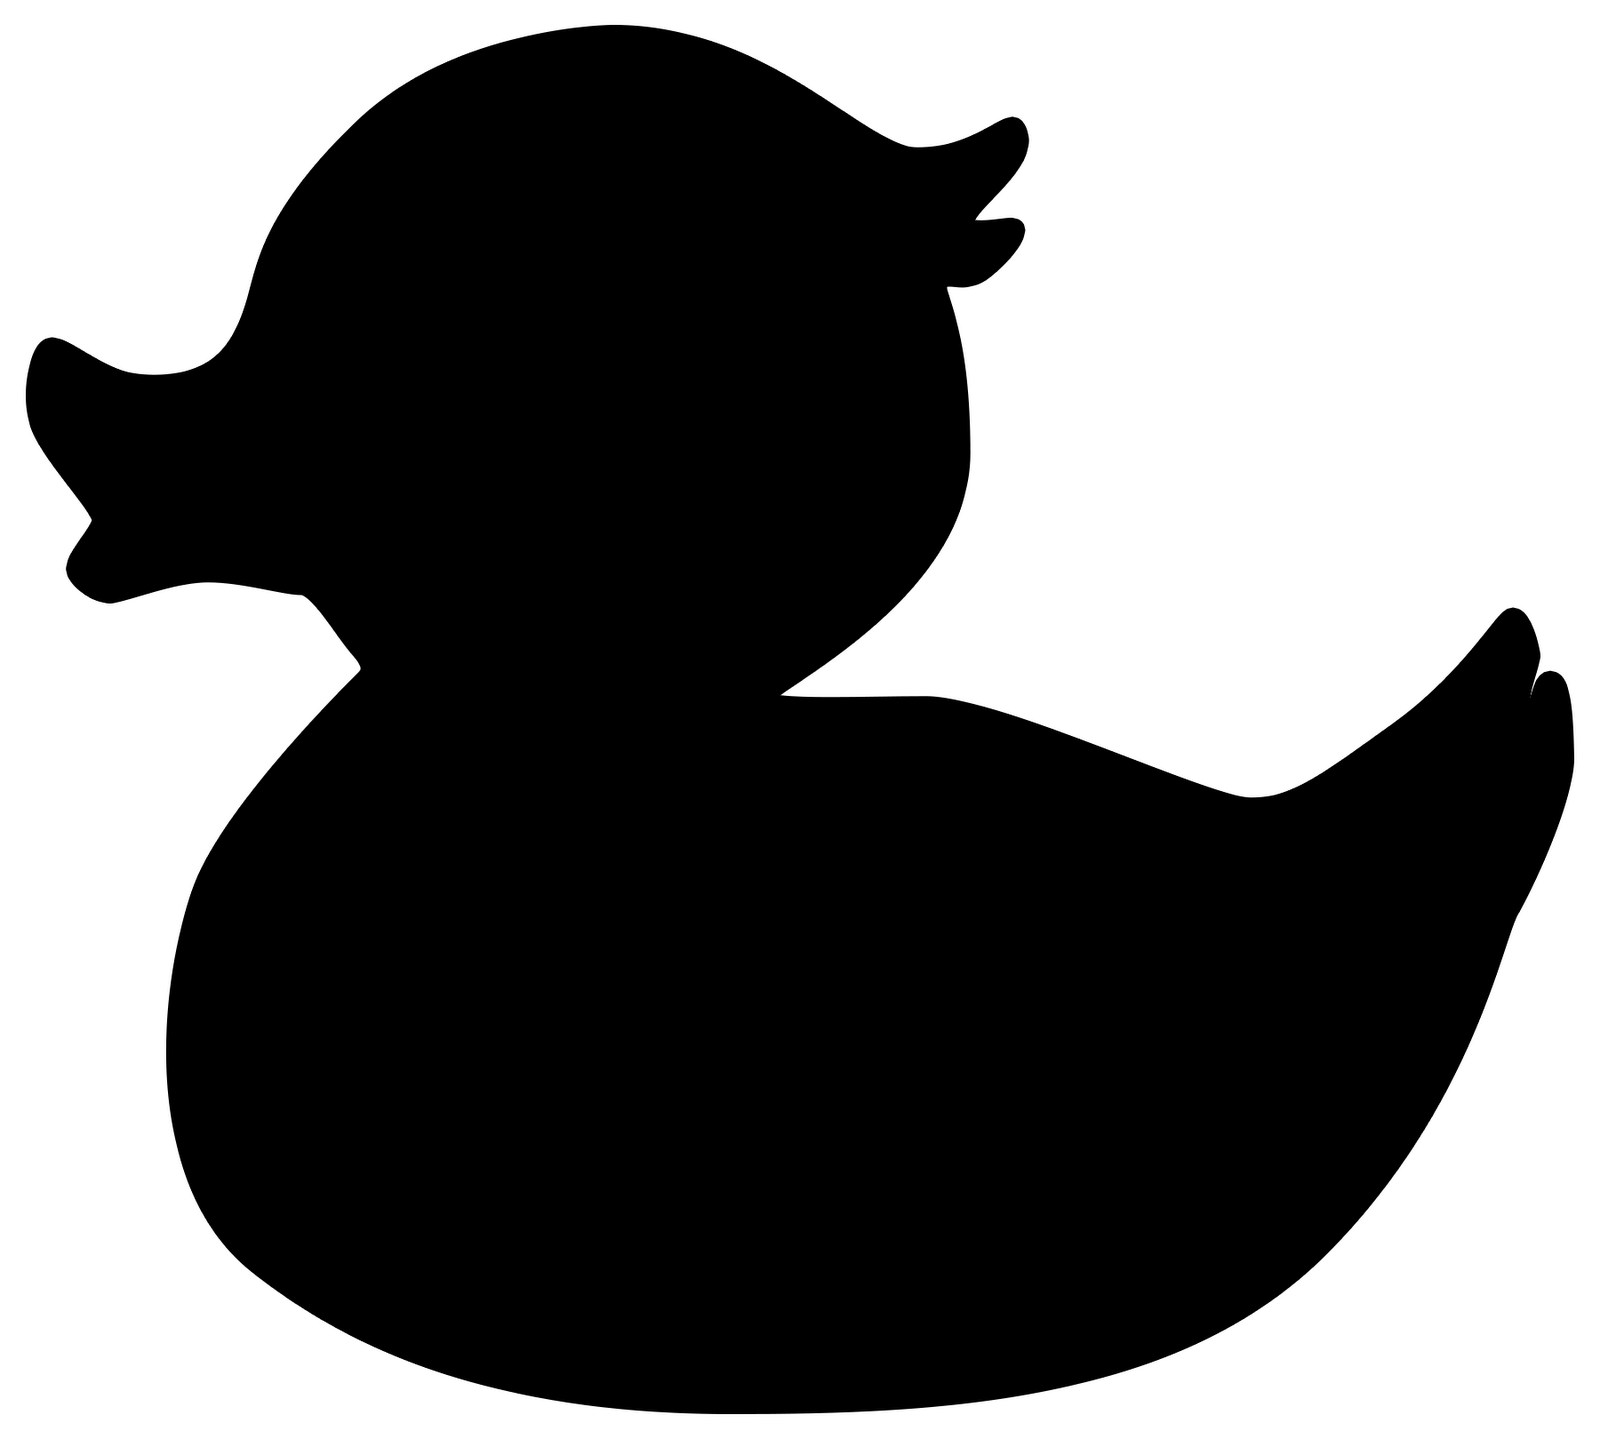 Rubber Duck Silhouette - Clipart library